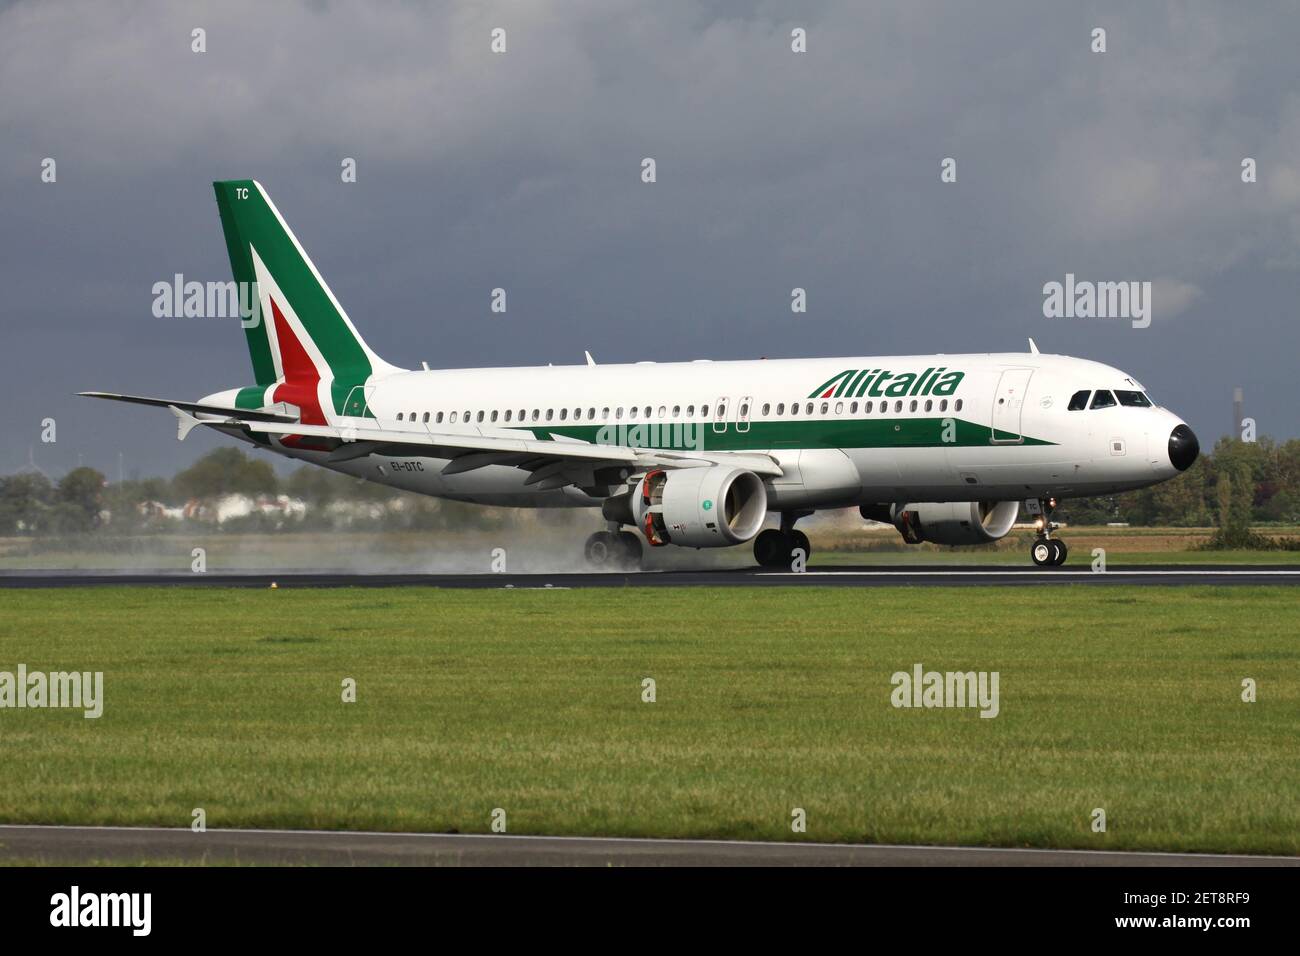 Italian Alitalia Airbus A320-200 with registration EI-DTC just landed on runway 18R (Polderbaan) of Amsterdam Airport Schiphol after a rain shower. Stock Photo